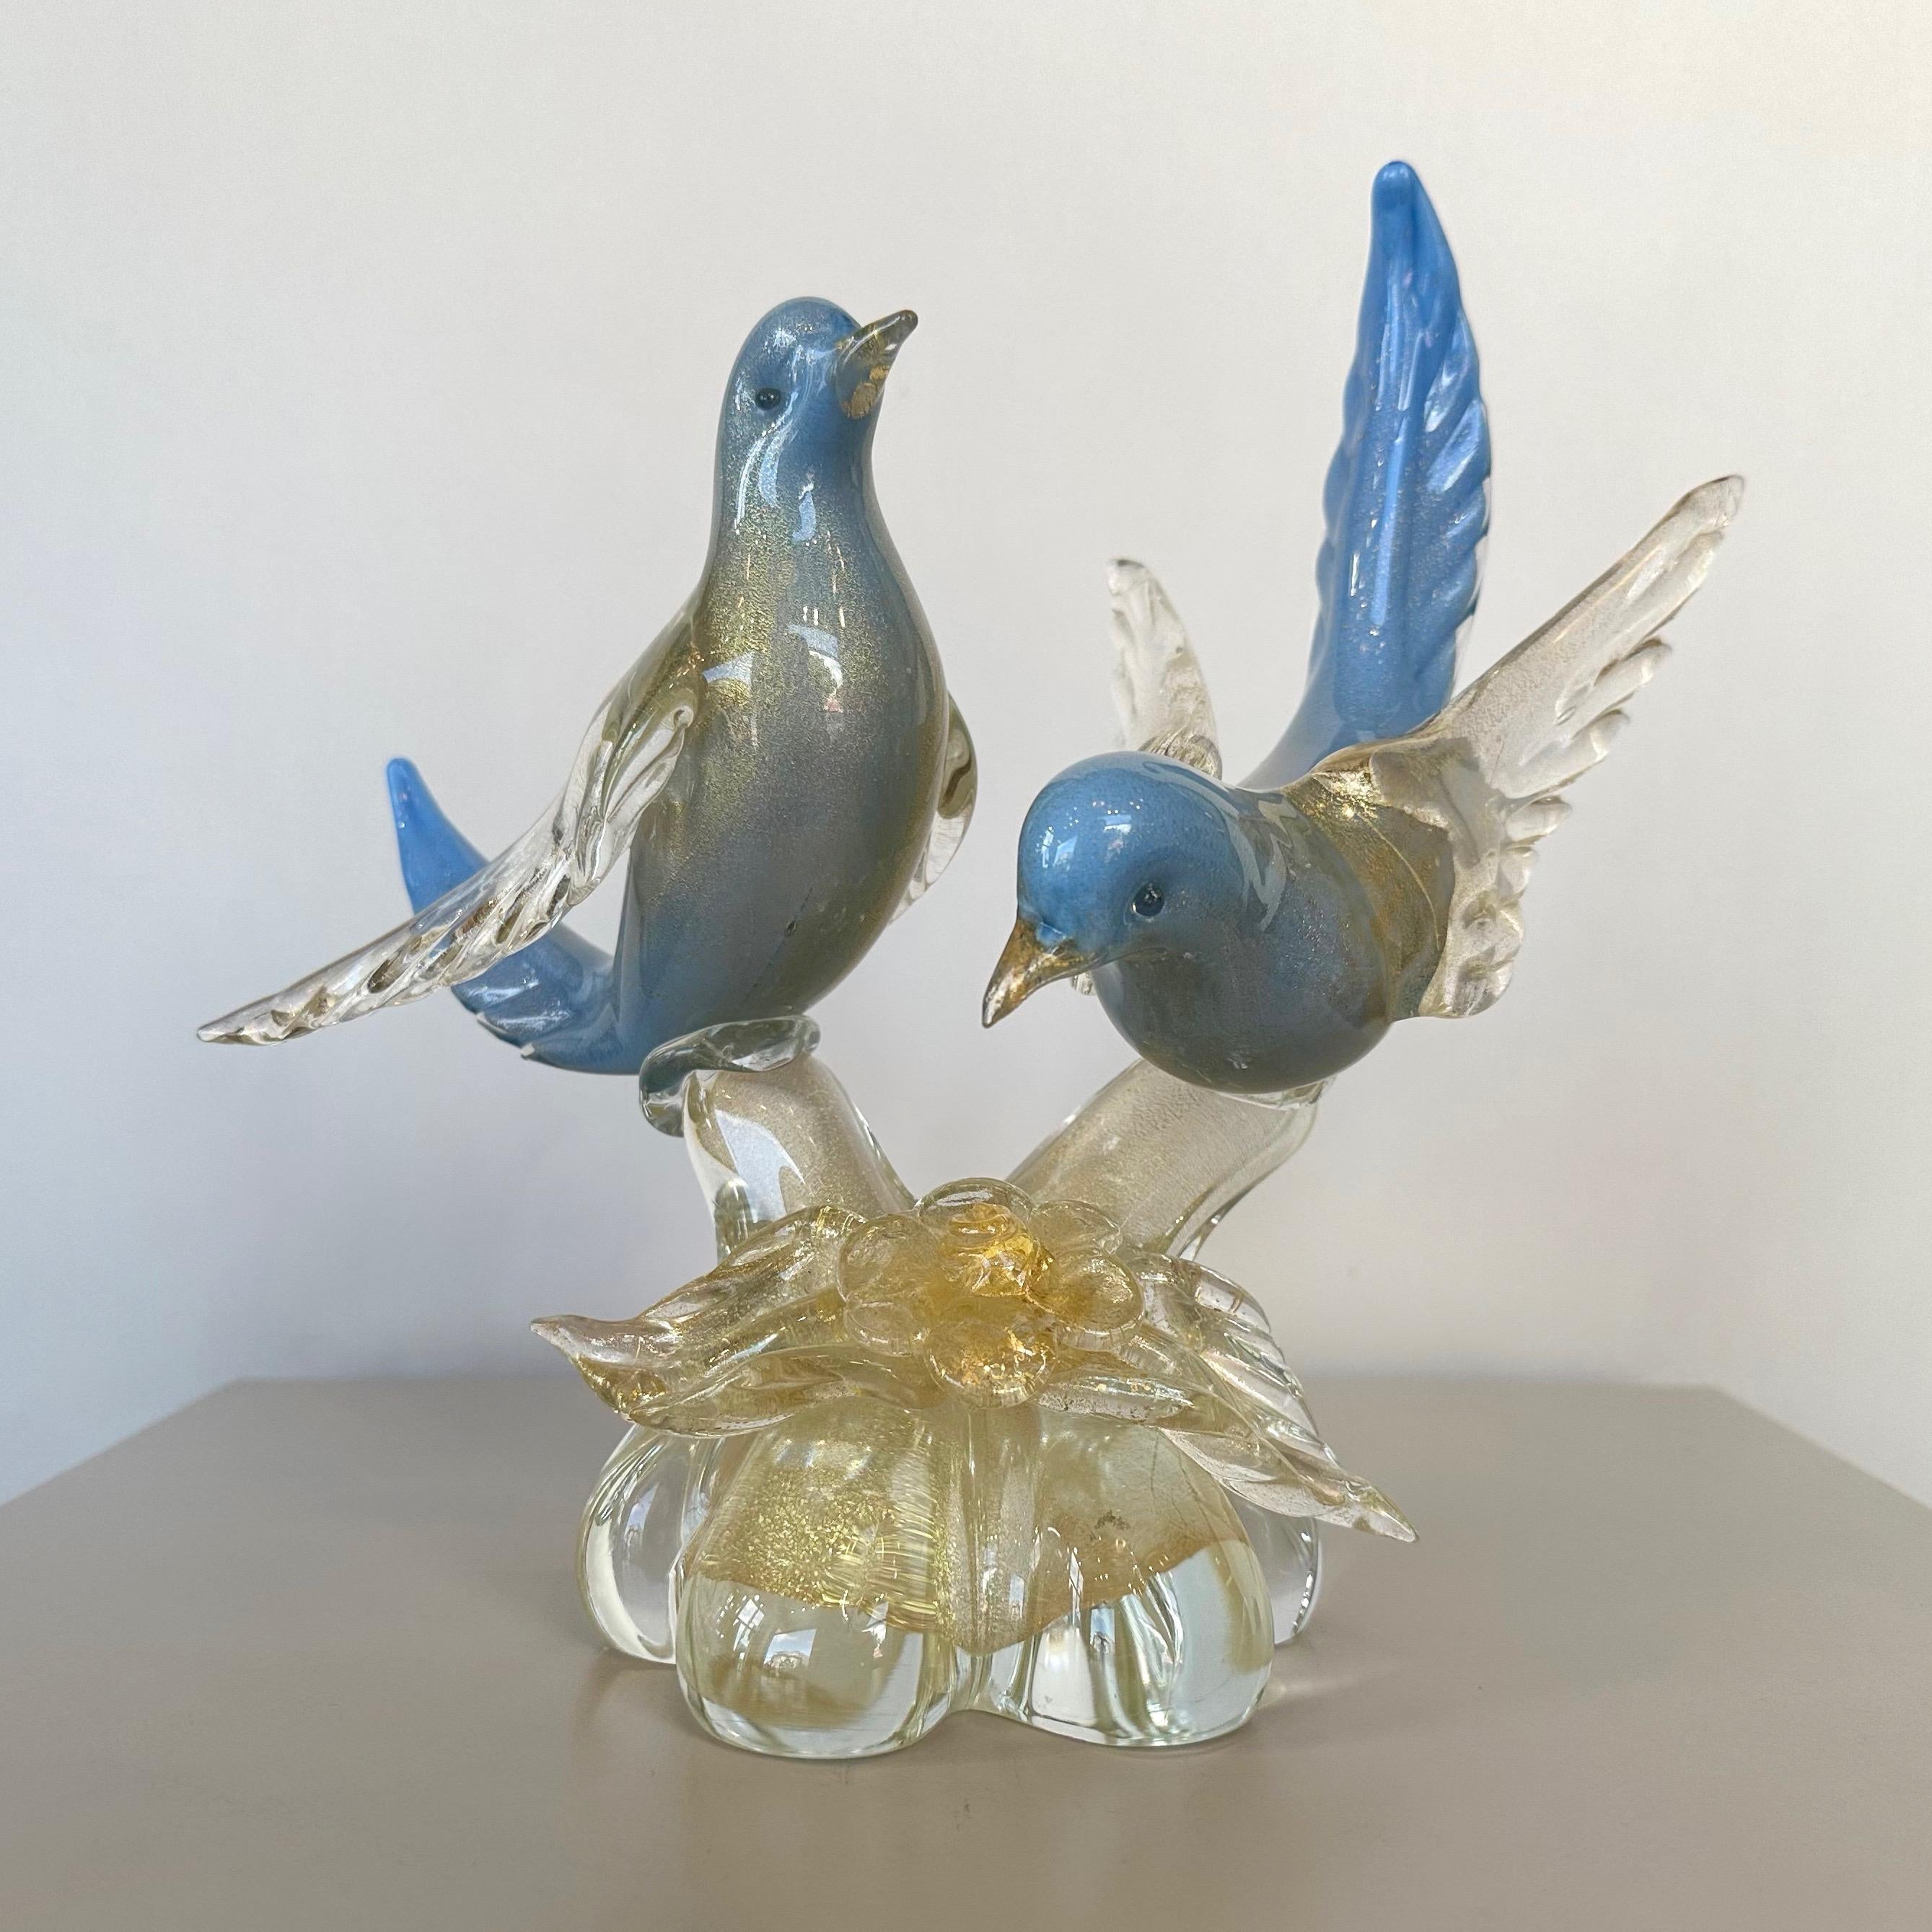 An enchanting and uncommon 1950s hand-crafted Murano glass gold-flecked blue birds sculpture by Salviati, with a design attributed to Alfredo Barbini.

Very skillfully executed life-size depiction of a gorgeous matched pair of animated birds—perhaps